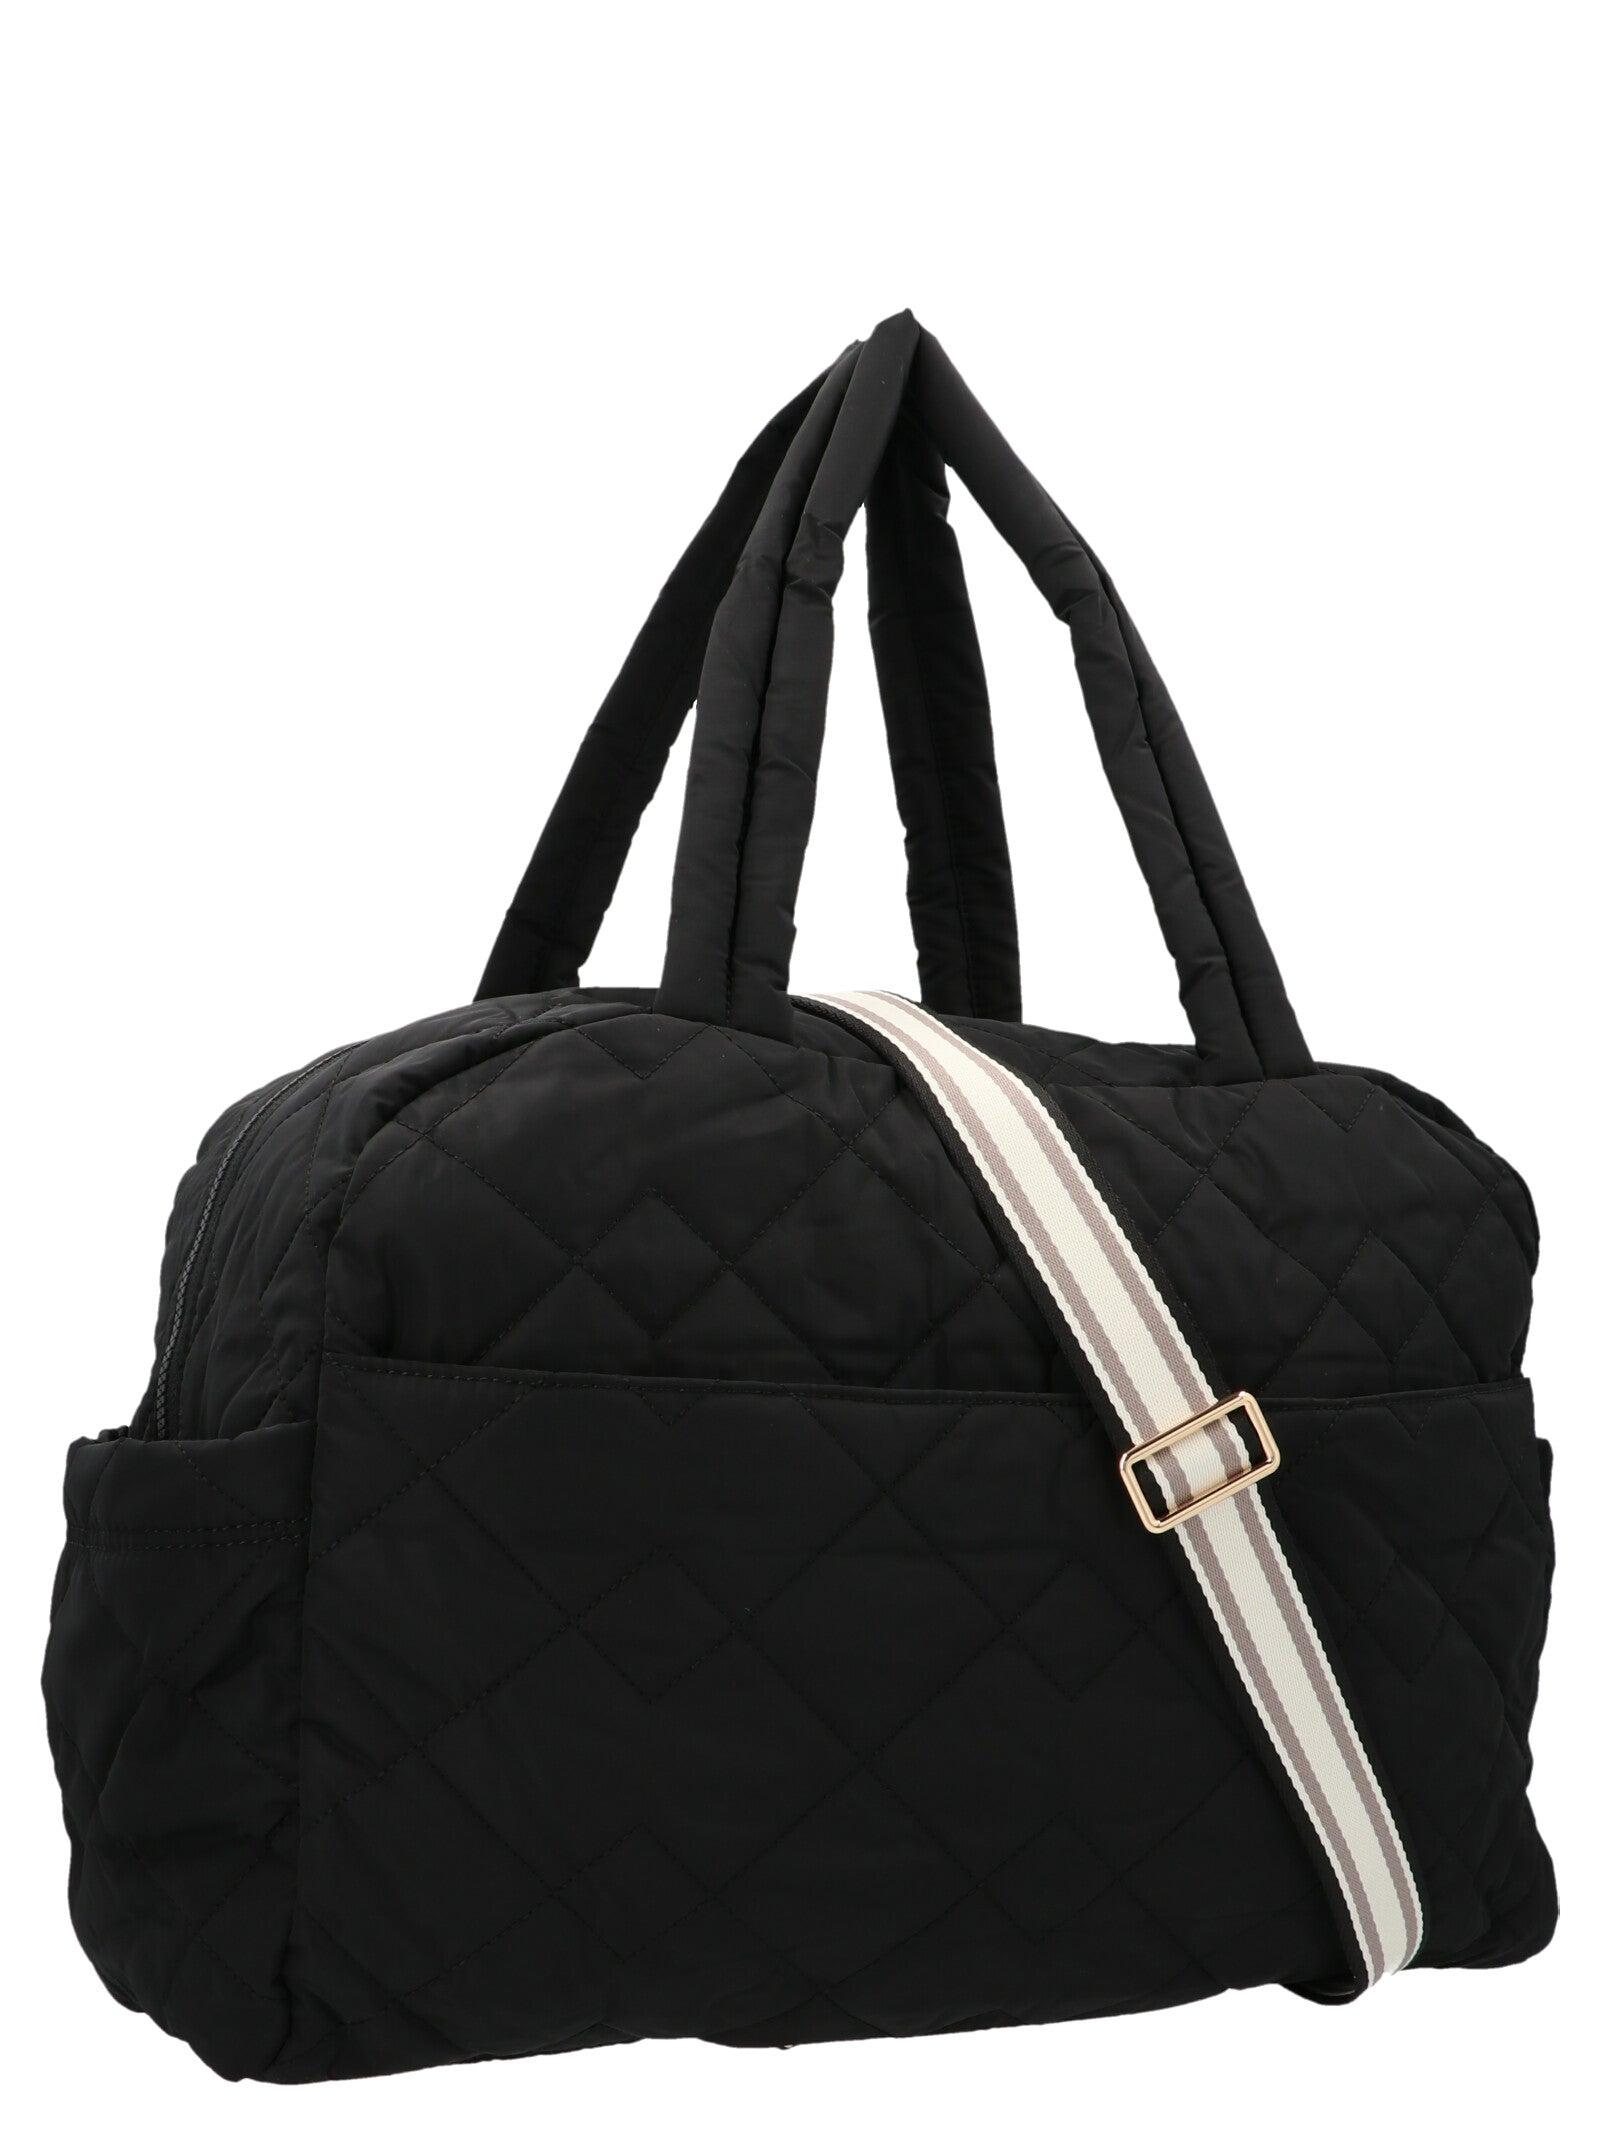 Marc Jacobs The Duffle Bag